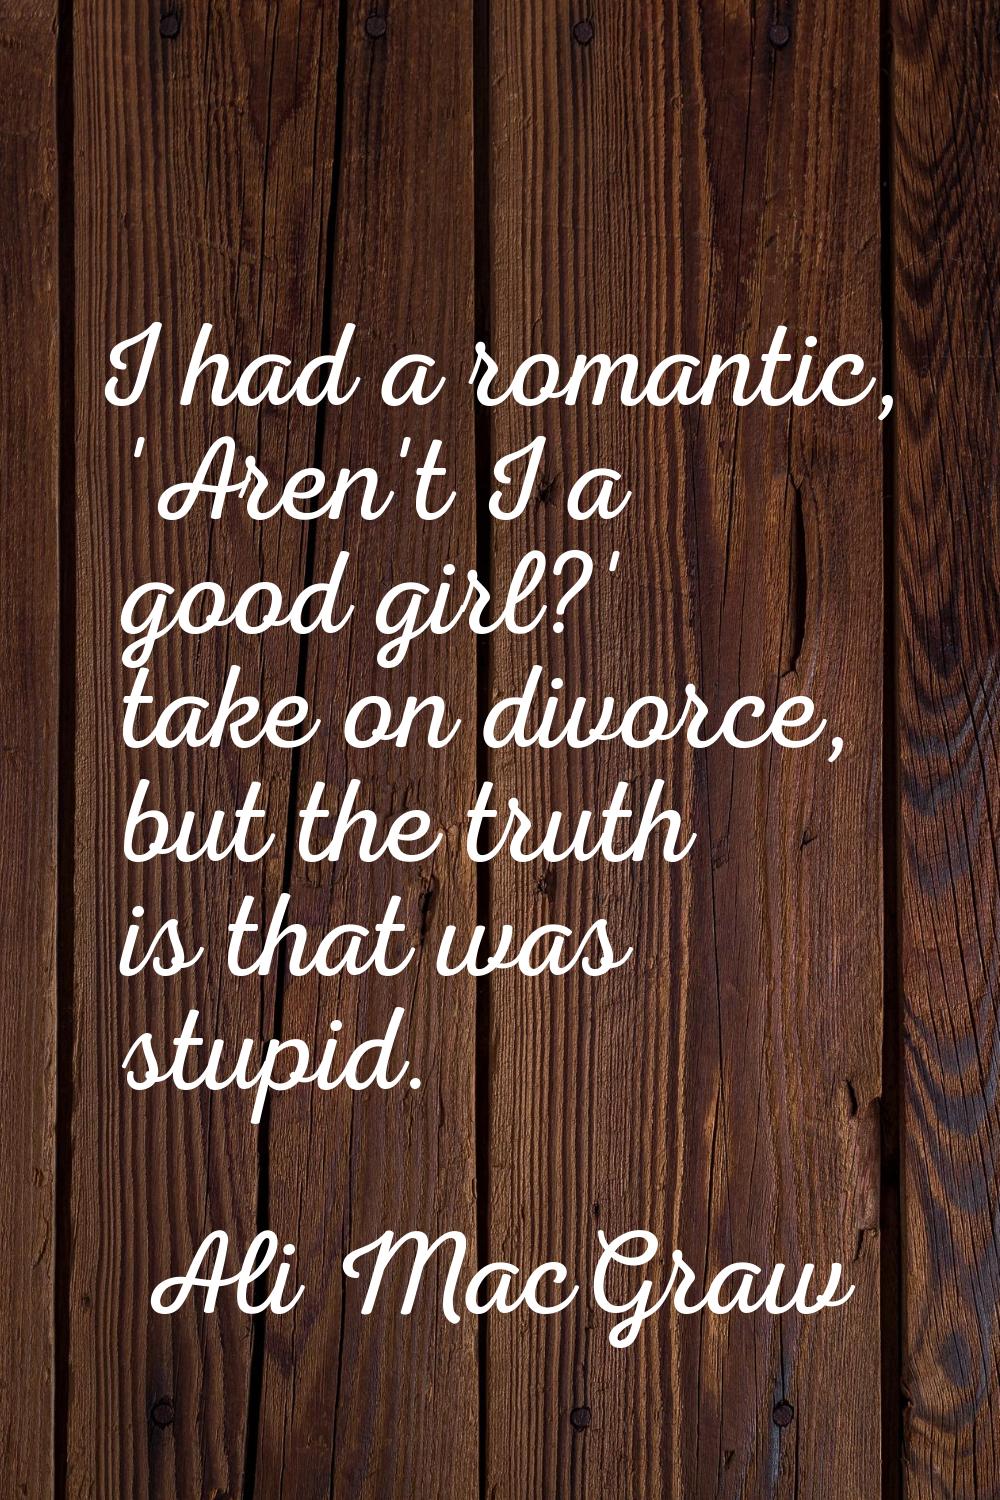 I had a romantic, 'Aren't I a good girl?' take on divorce, but the truth is that was stupid.